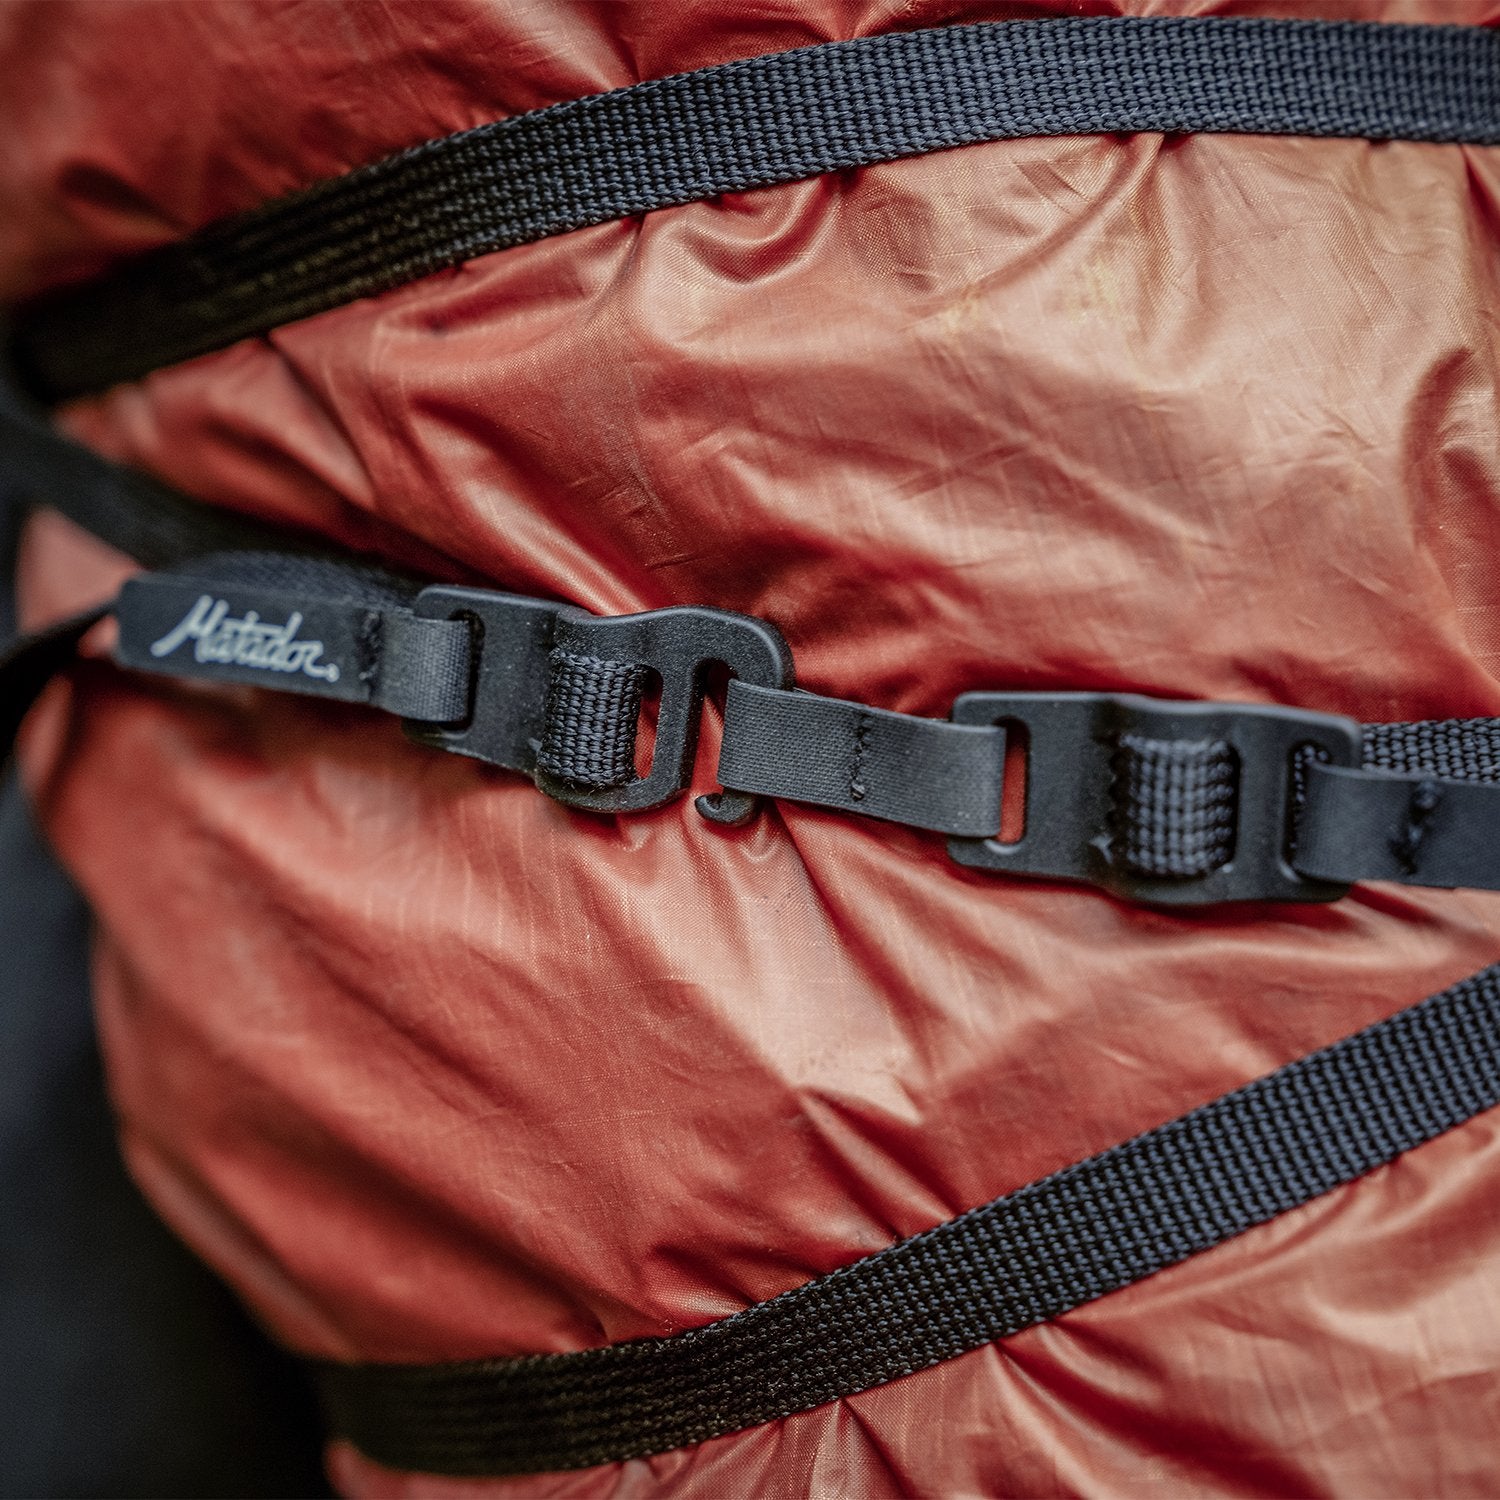 Matador Better Tether Gear Straps 2-Pack - Storming Gravity